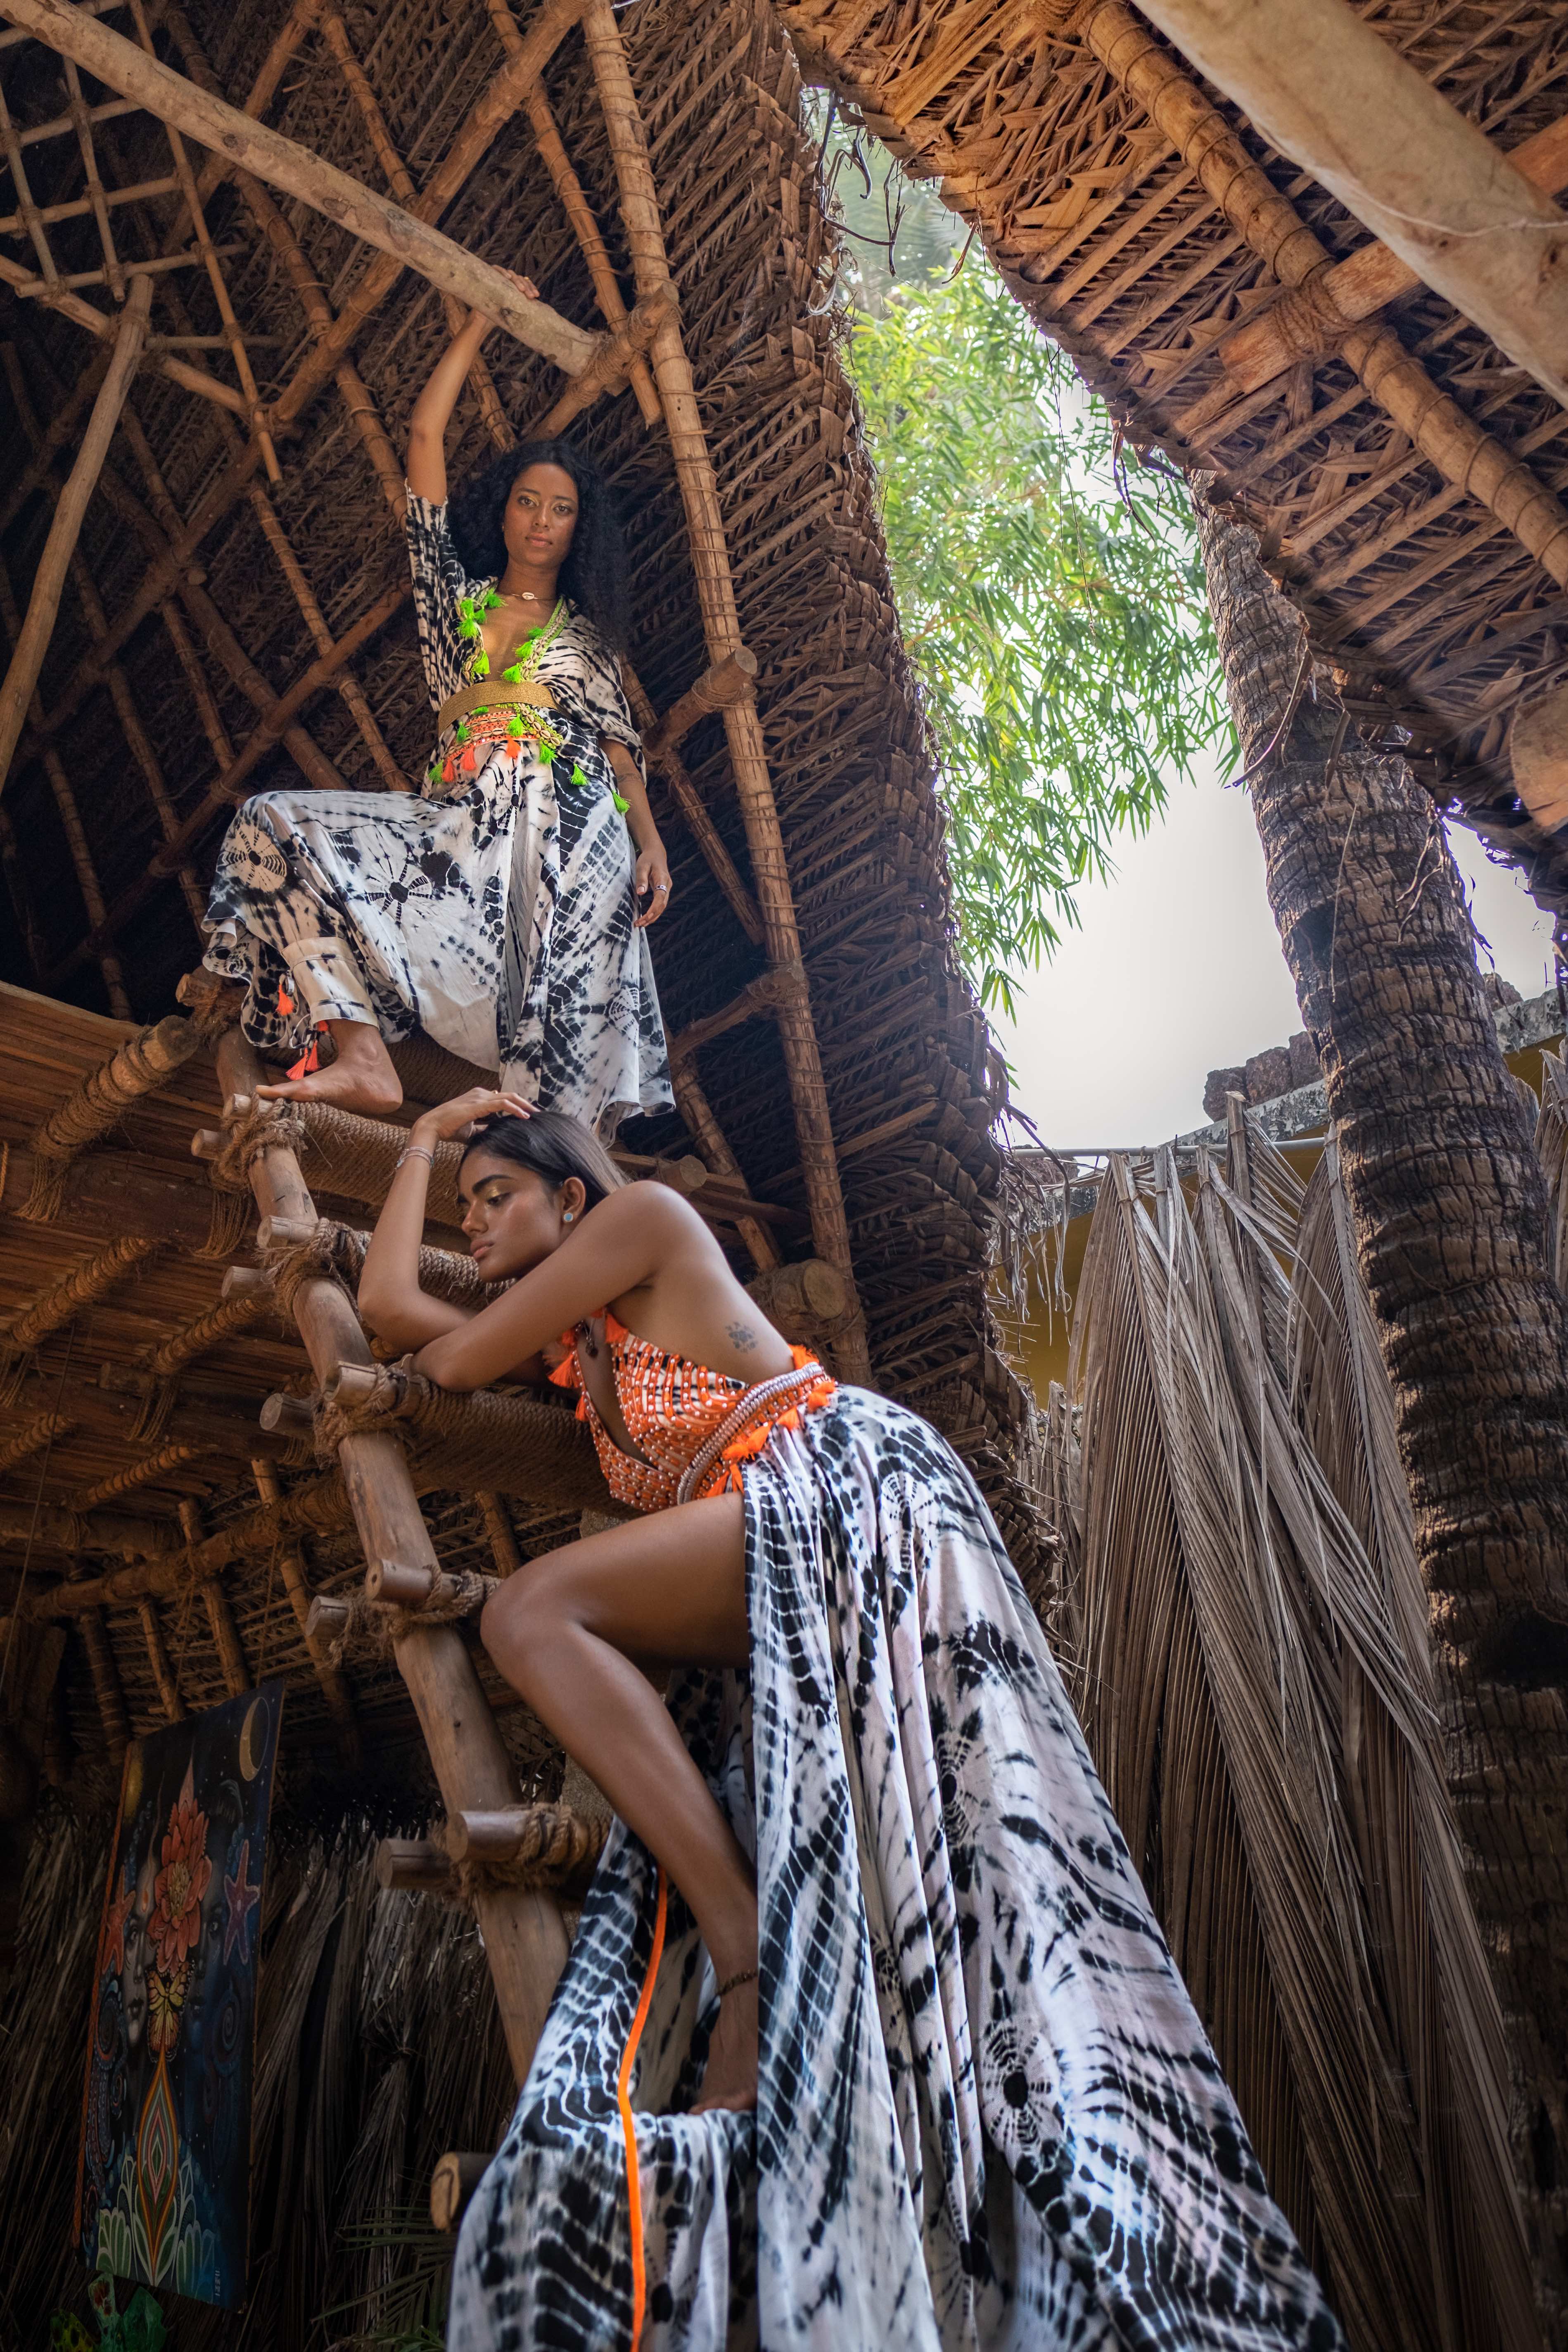 two models wear long white dresses with bright orange and yellow accents by Surily G standing on a ladder to a tree house outdoors